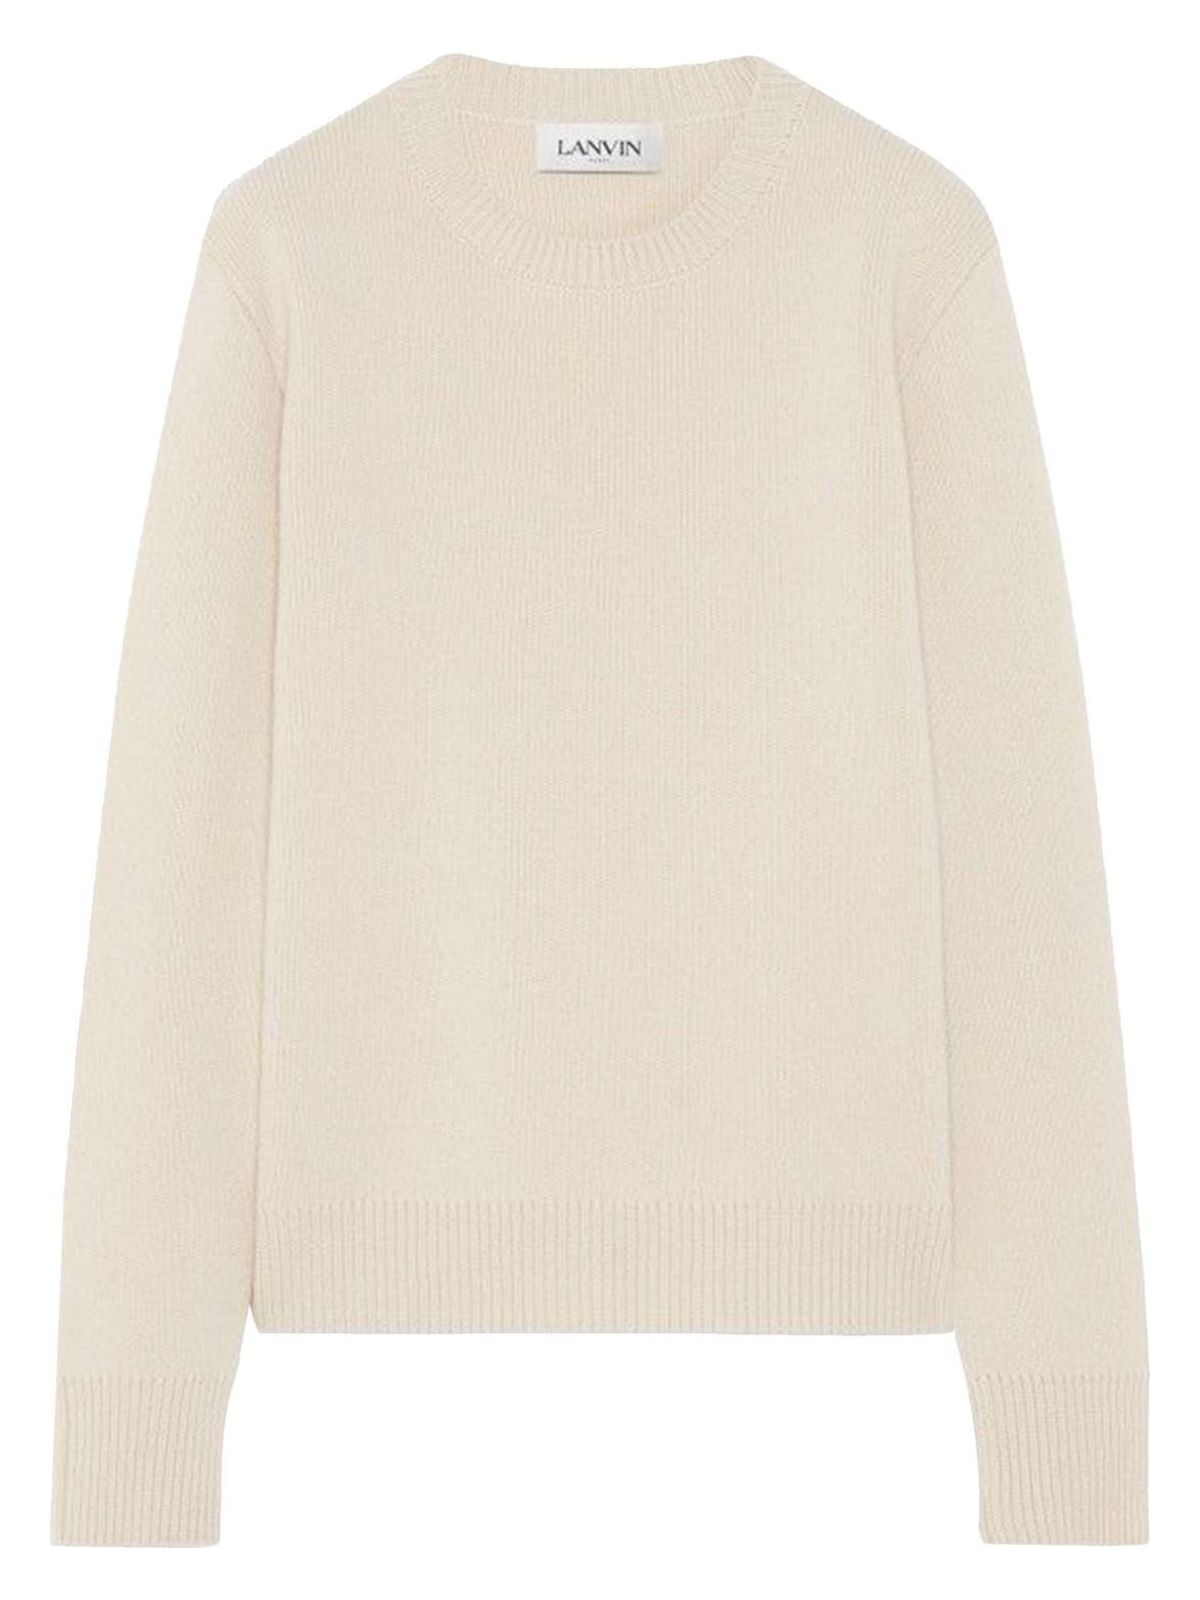 030 LANVIN WOOL AND CASHMERE SWEATER